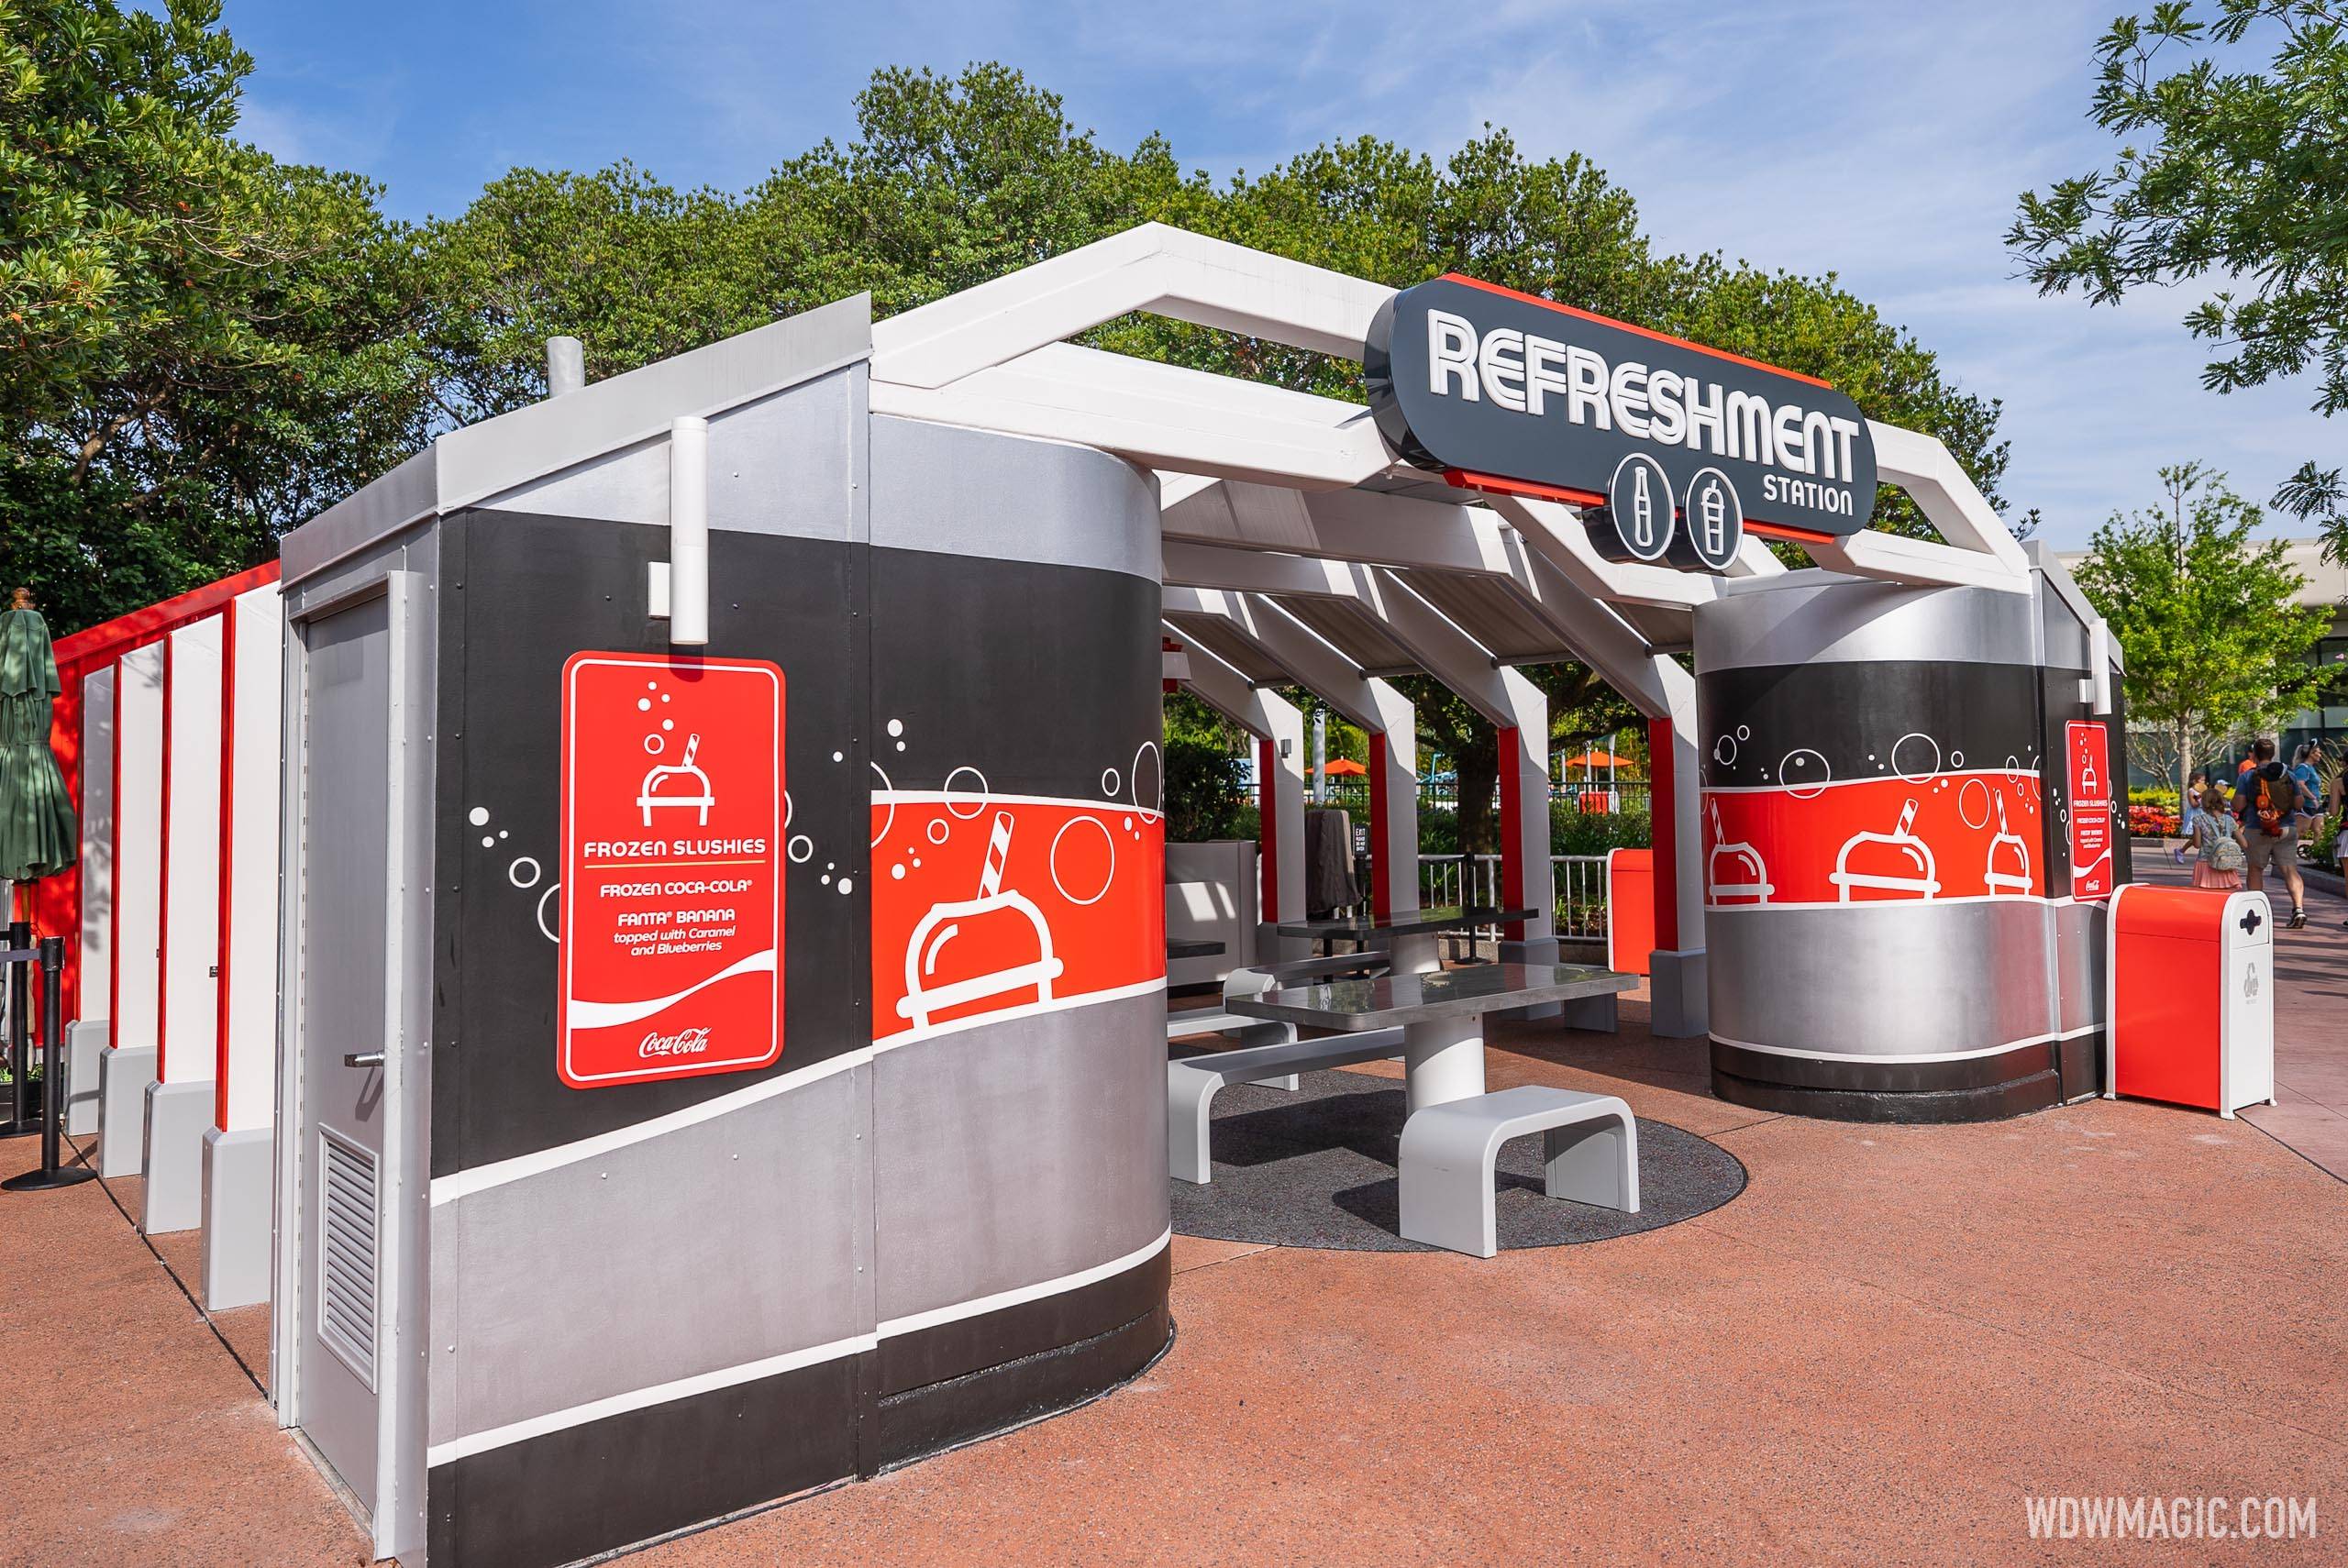 Refreshment Station overview